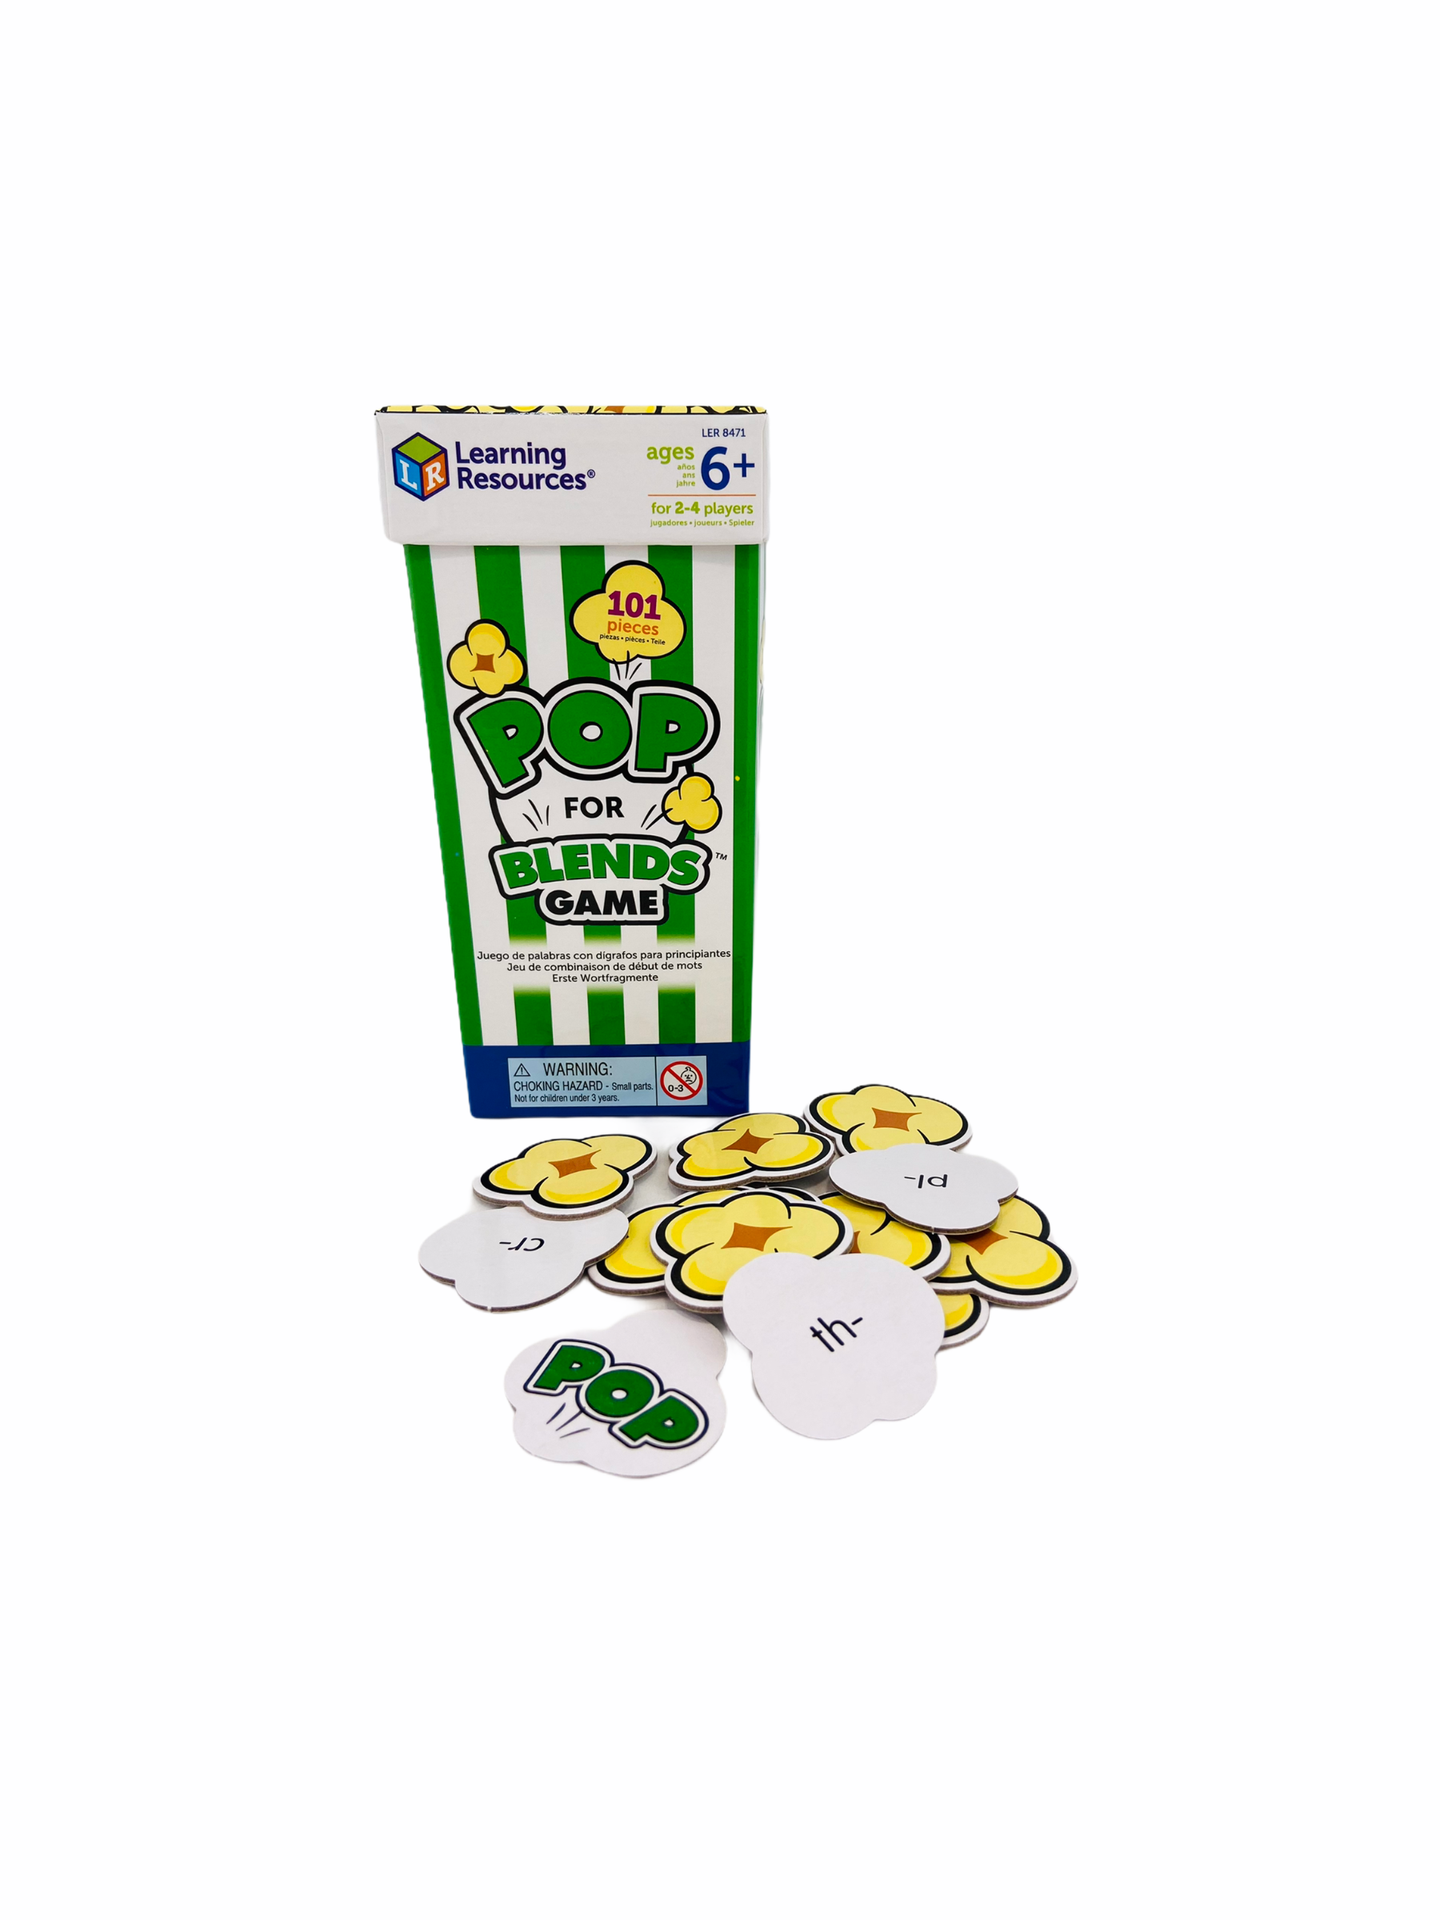 Learning Resources Pop for Blends Game on display with popcorn cards in front of green and white packaging box